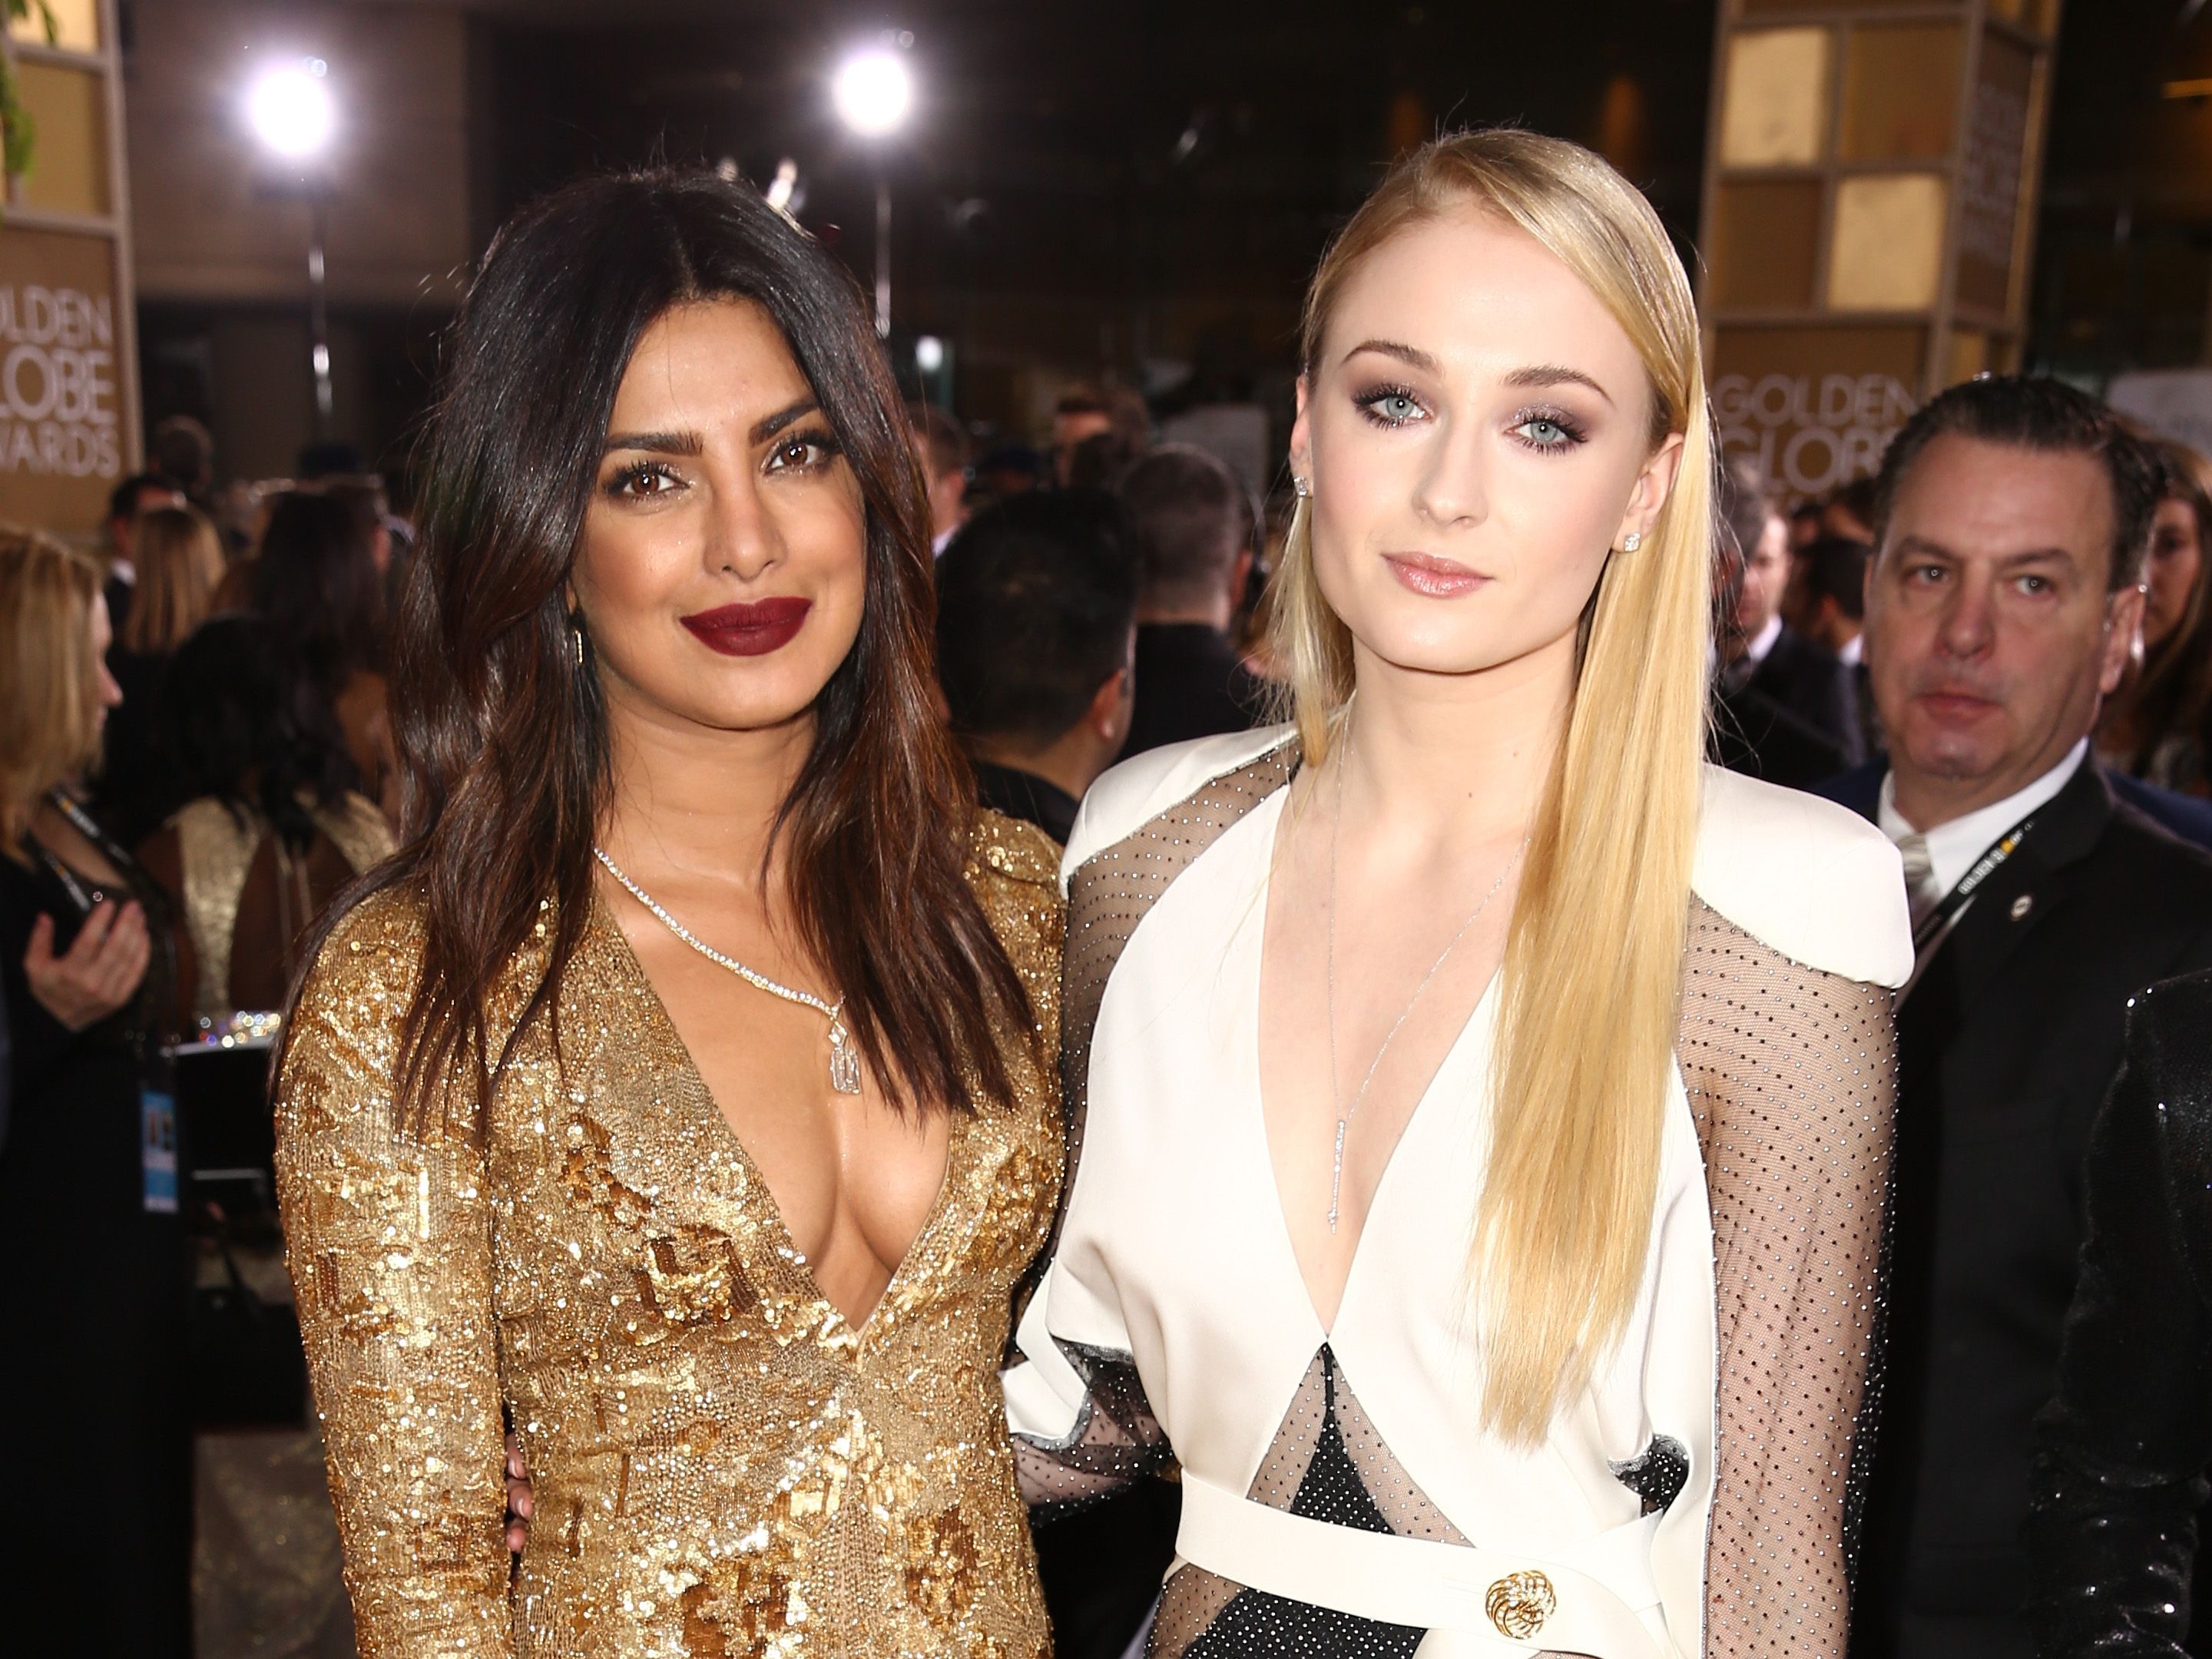 Sophie Turner Gets Down With Priyanka Chopra And Her Mom At A